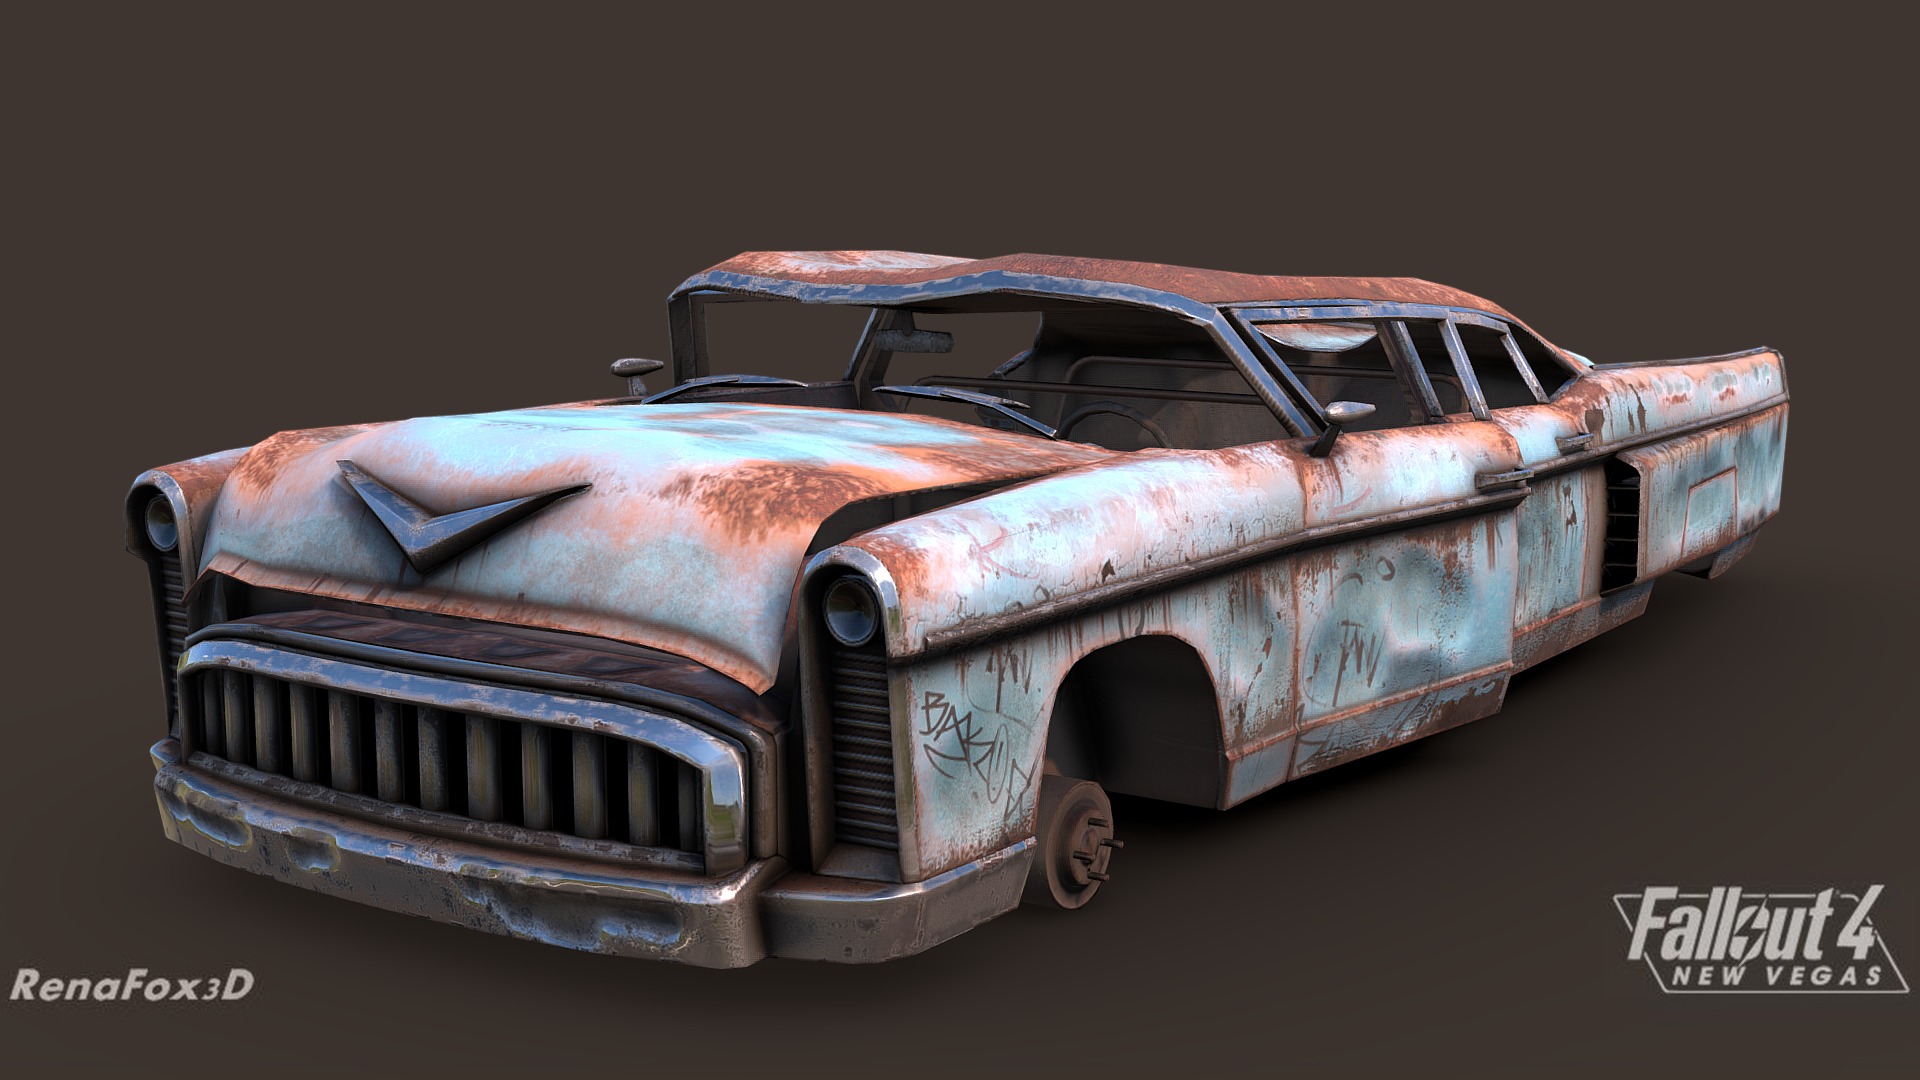 The somewhat iconic blue sedan from Fallout 3 and New Vegas, remade for Fallout 4: New Vegas, most people will probably remember it as &ldquo;that exploding car